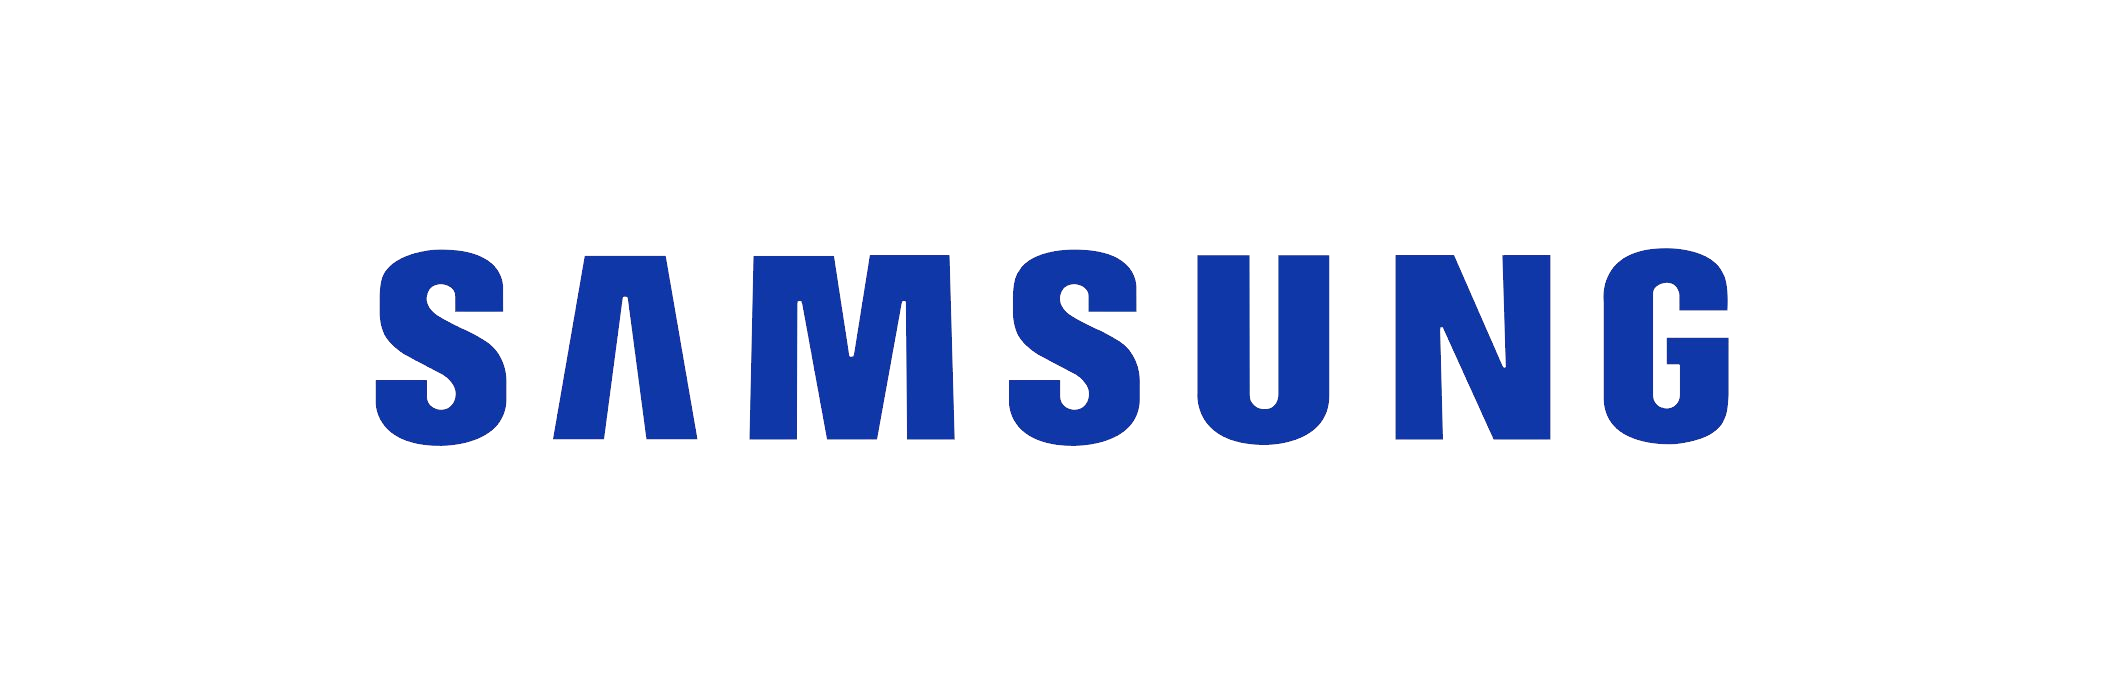 Samsung logo, our deals on Samsung products